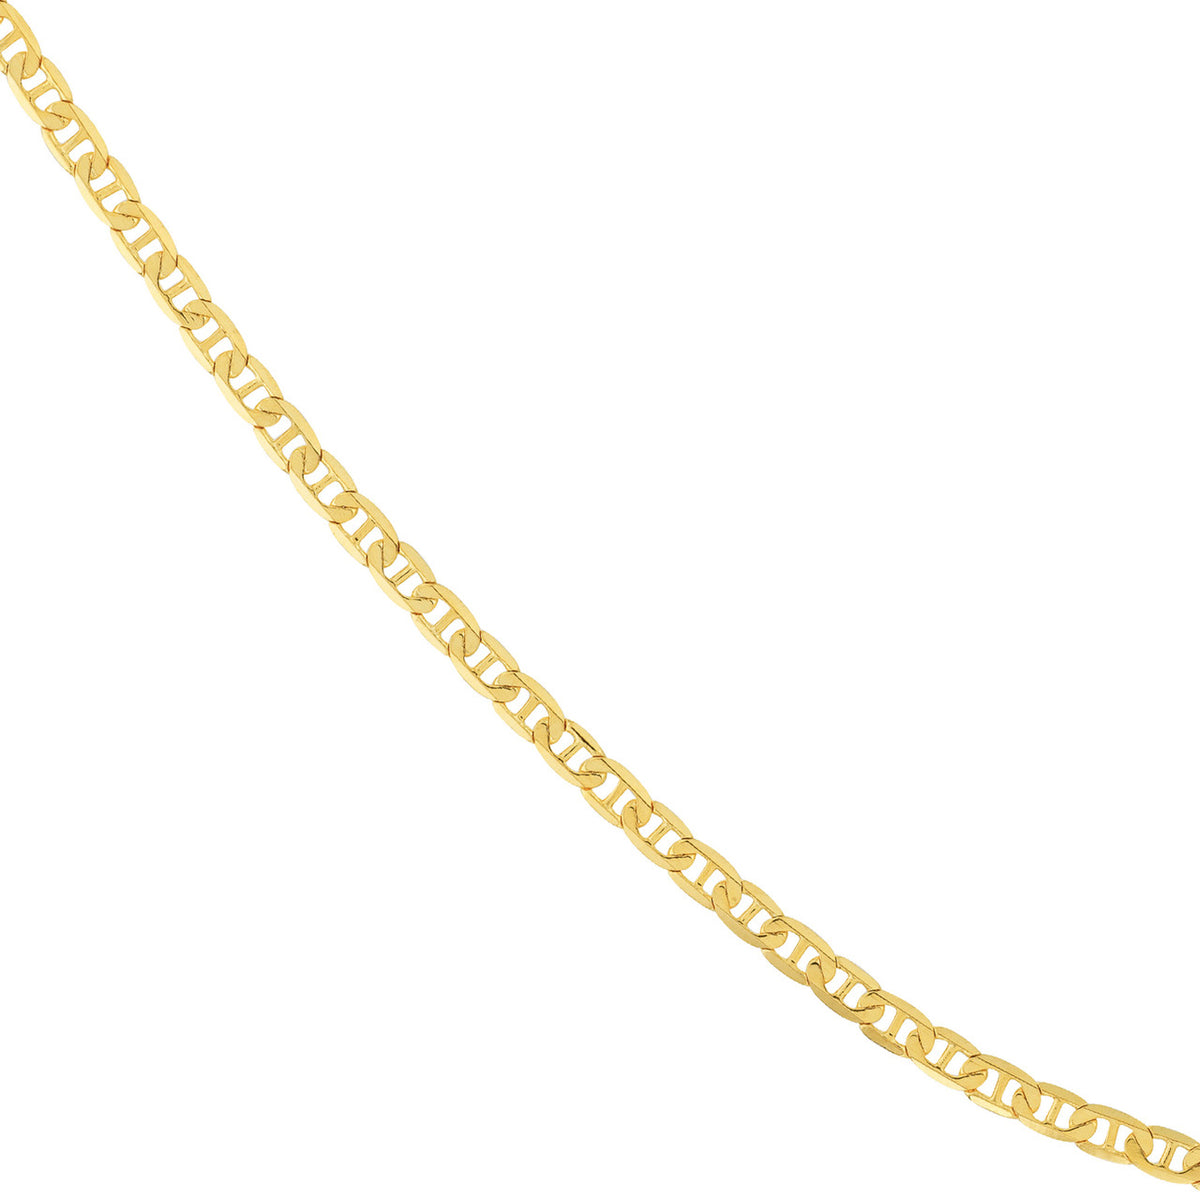 14K Yellow Gold or White Gold 2.30mm Mariner Chain Necklace with Lobster Lock